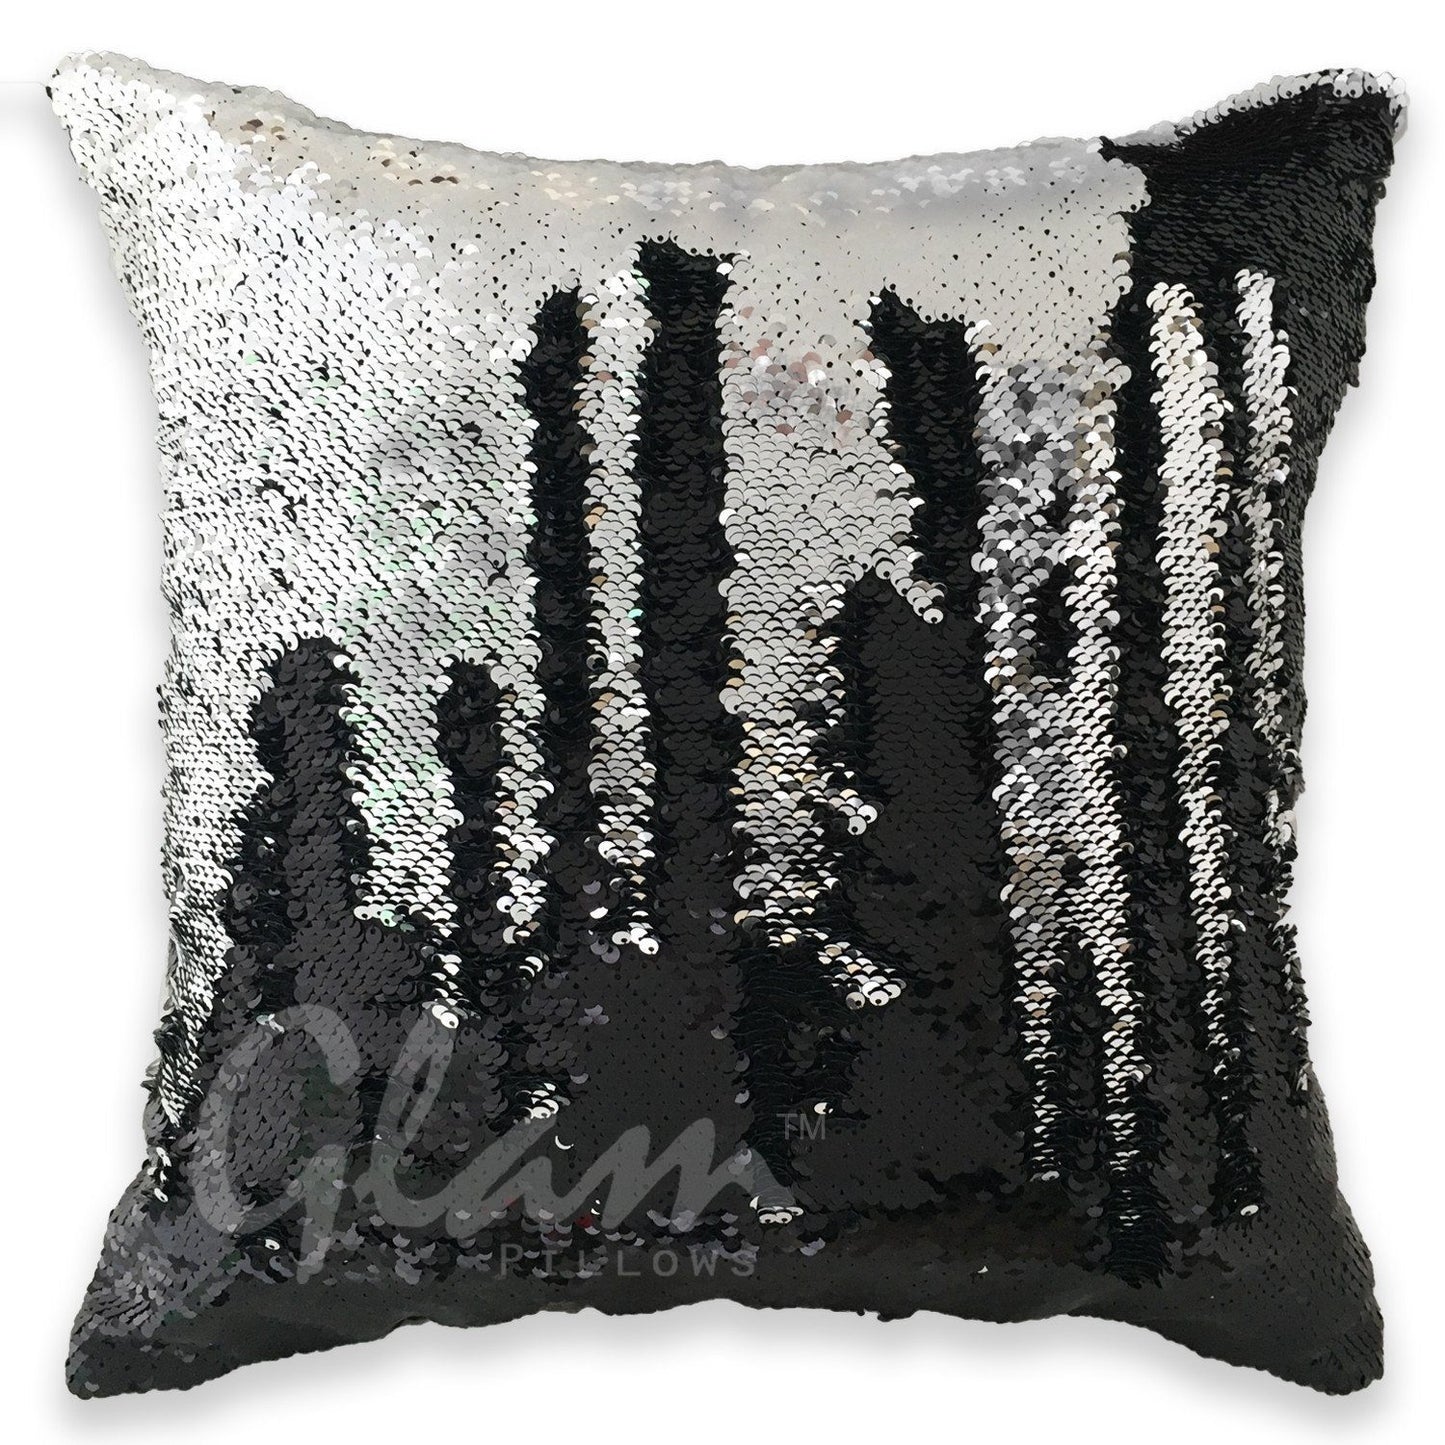 Mermaid Pillow Cover 16 X 16 Inches, Pillow Not Included (Black/Silver)